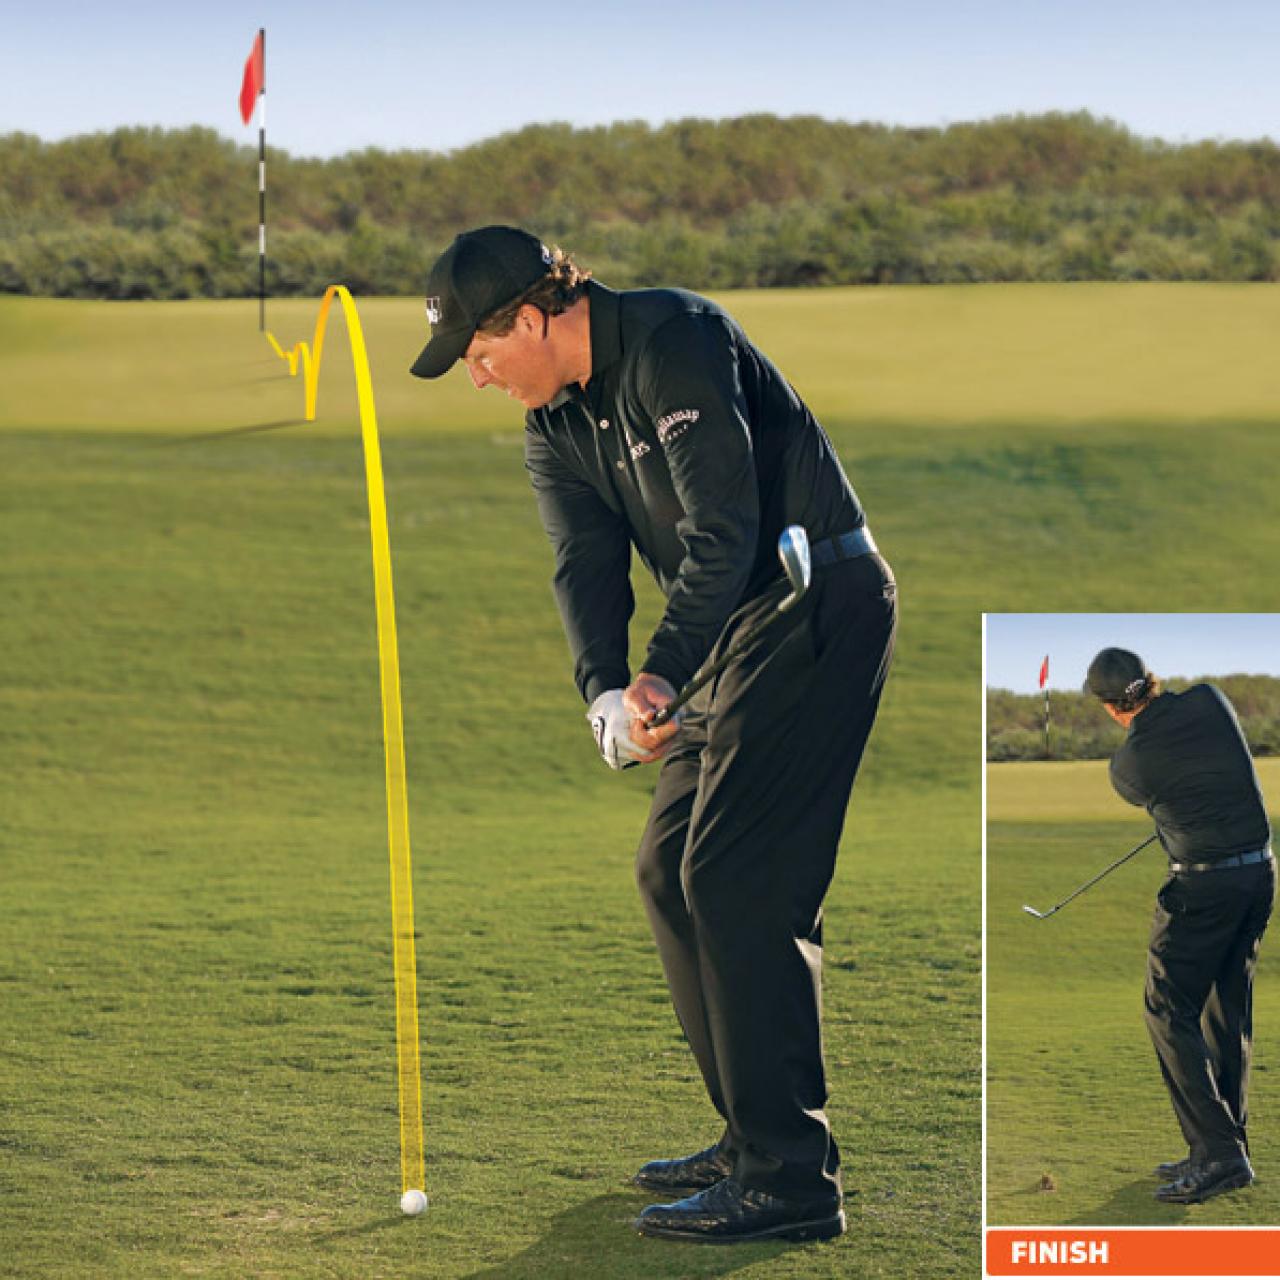 Phil Mickelson: How To Hit 2 Basic Pitches and Chips | How To | Golf Digest